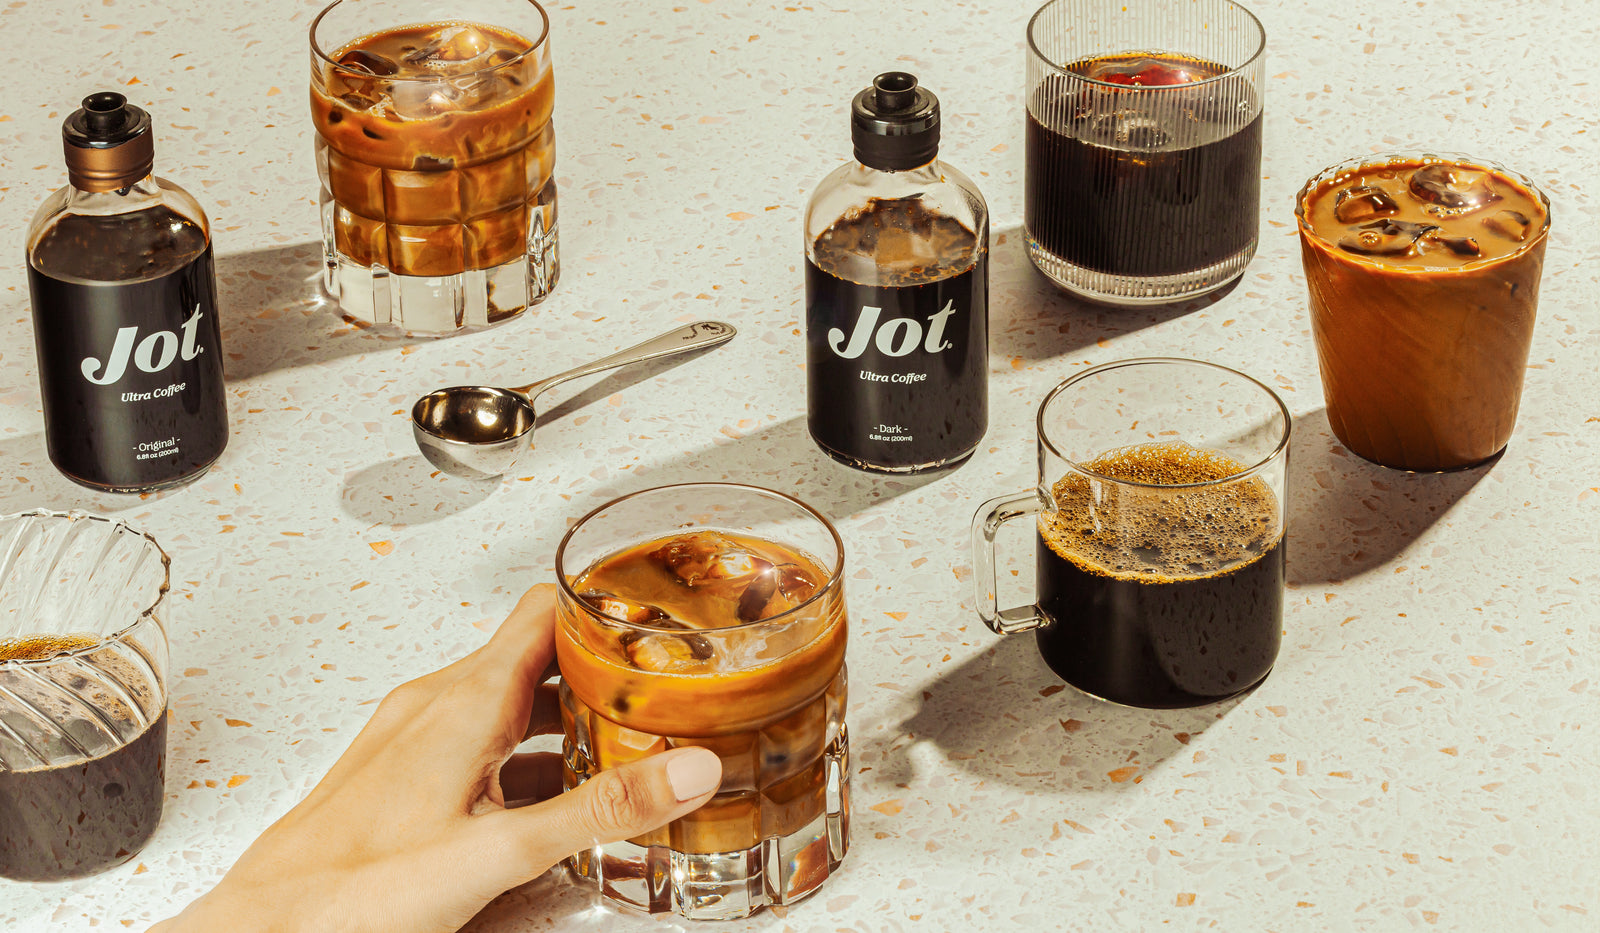 5 Delicious Reasons To Try Jot Ultra Concentrated Coffee and 25